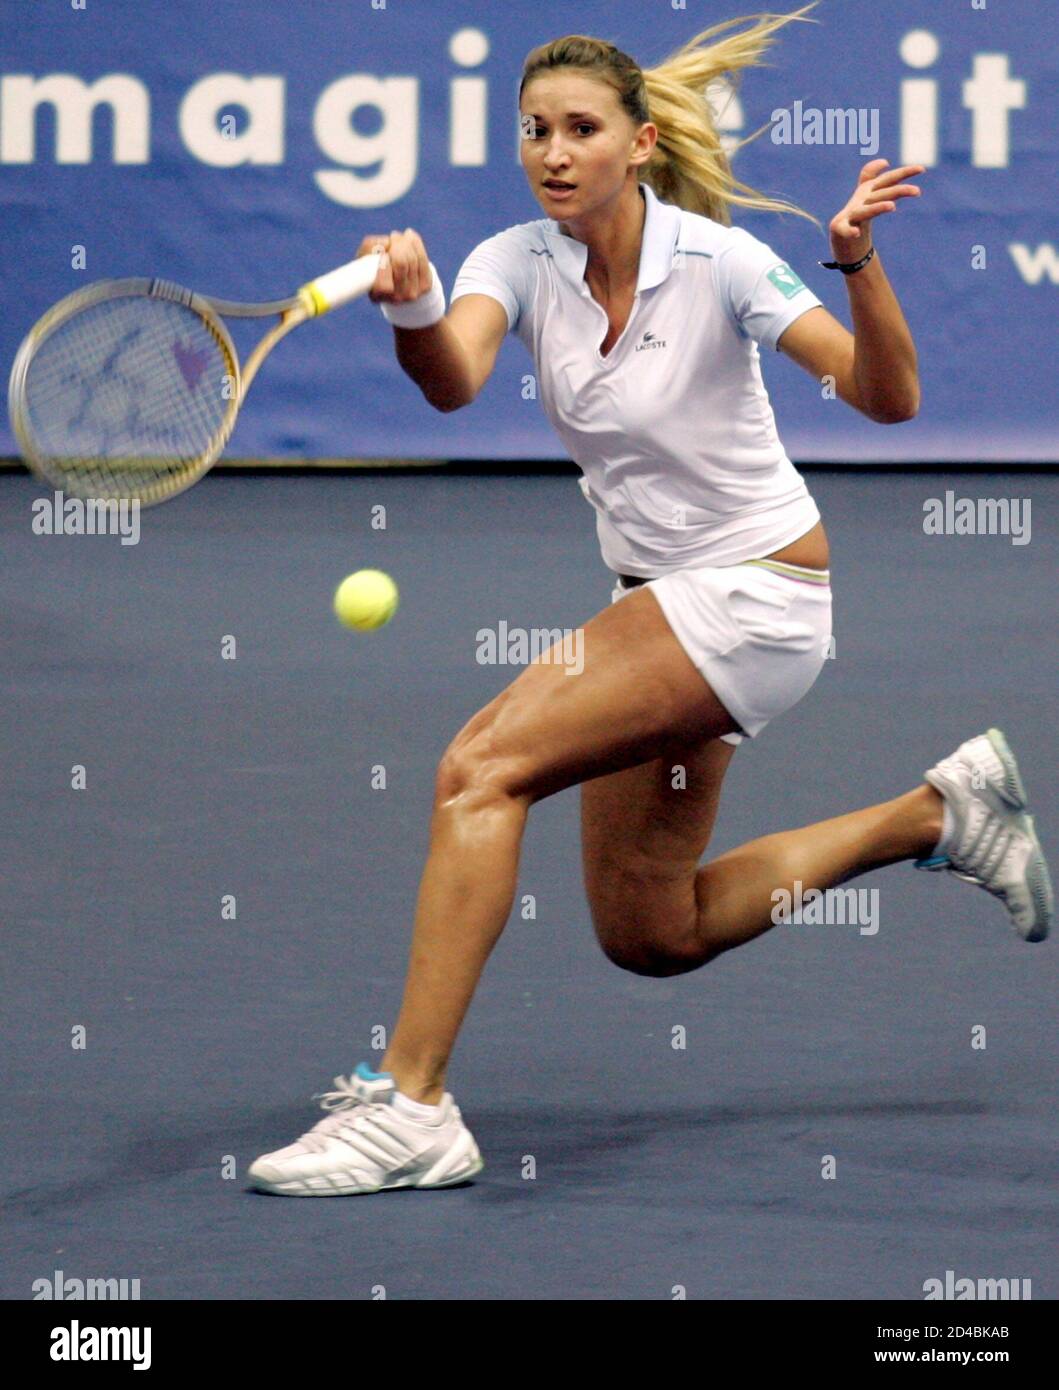 France's Tatiana Golovin returns a ball to Svetlana Kuznetsova of Russia  during the final Fed Cup tennis match in Moscow, November 28, 2004.  Moscow-born Golovin kept alive France's hopes of retaining their